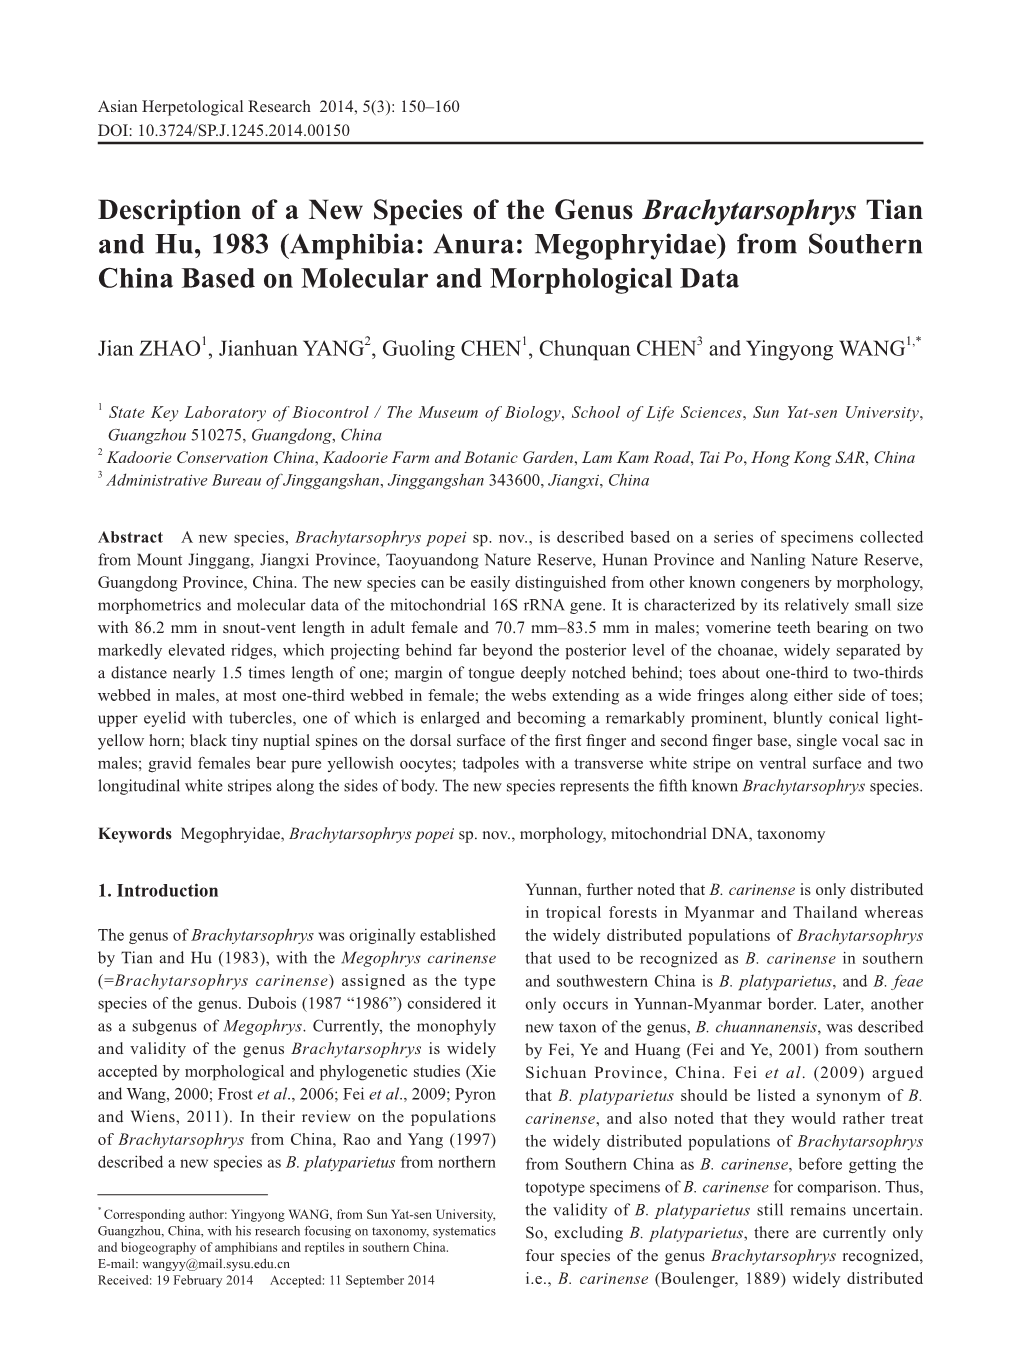 Description of a New Species of the Genus Brachytarsophrys Tian And